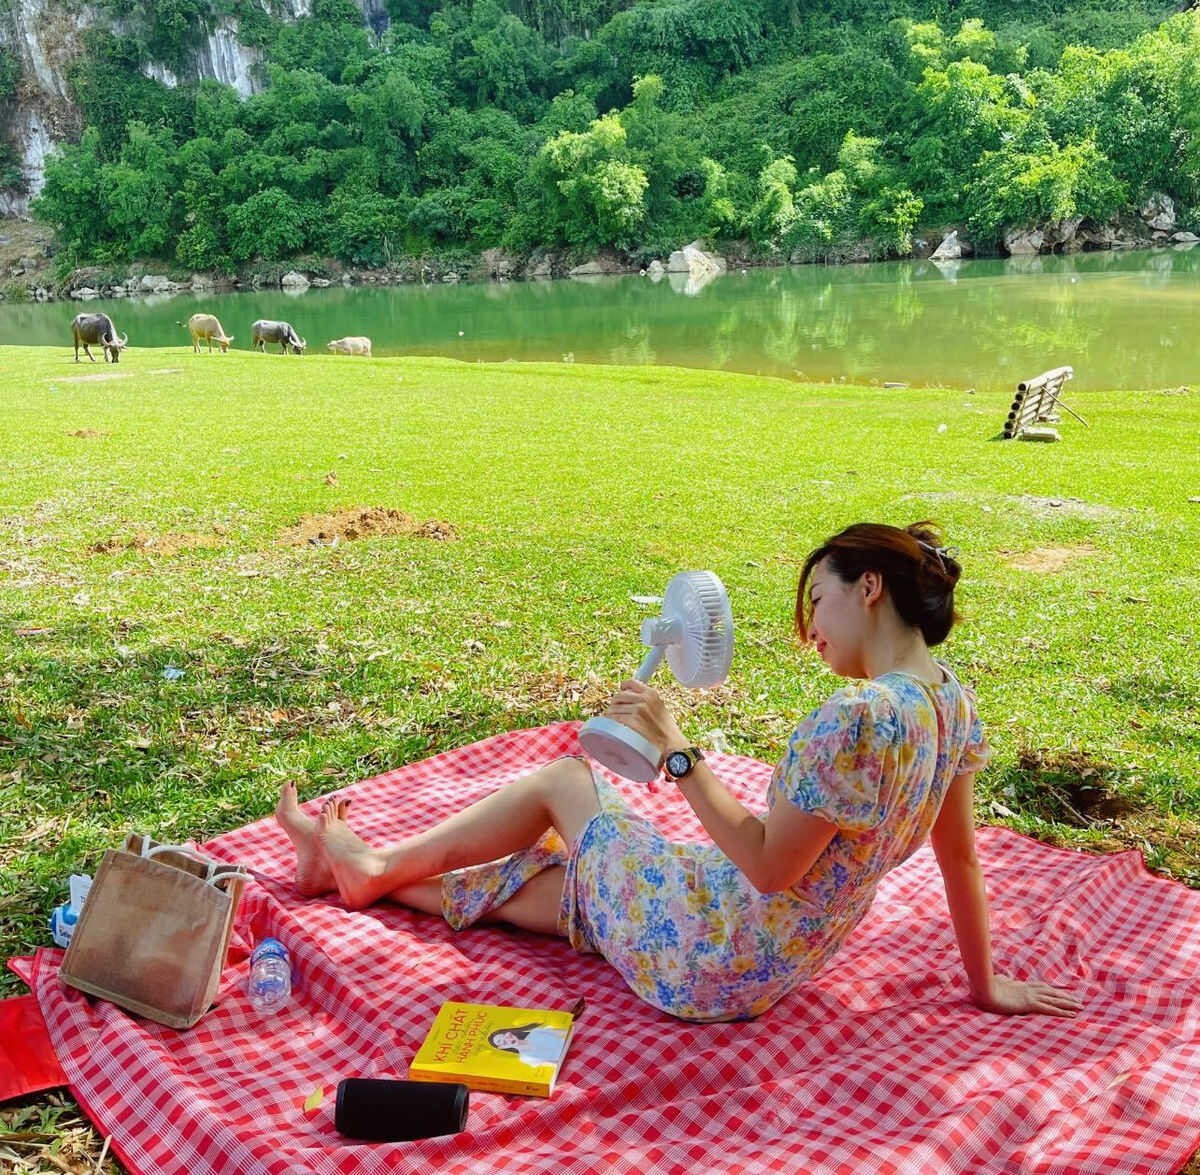 The flat and green grass carpet is suitable for camping. Photo: Nguyen Hong Thu Trang